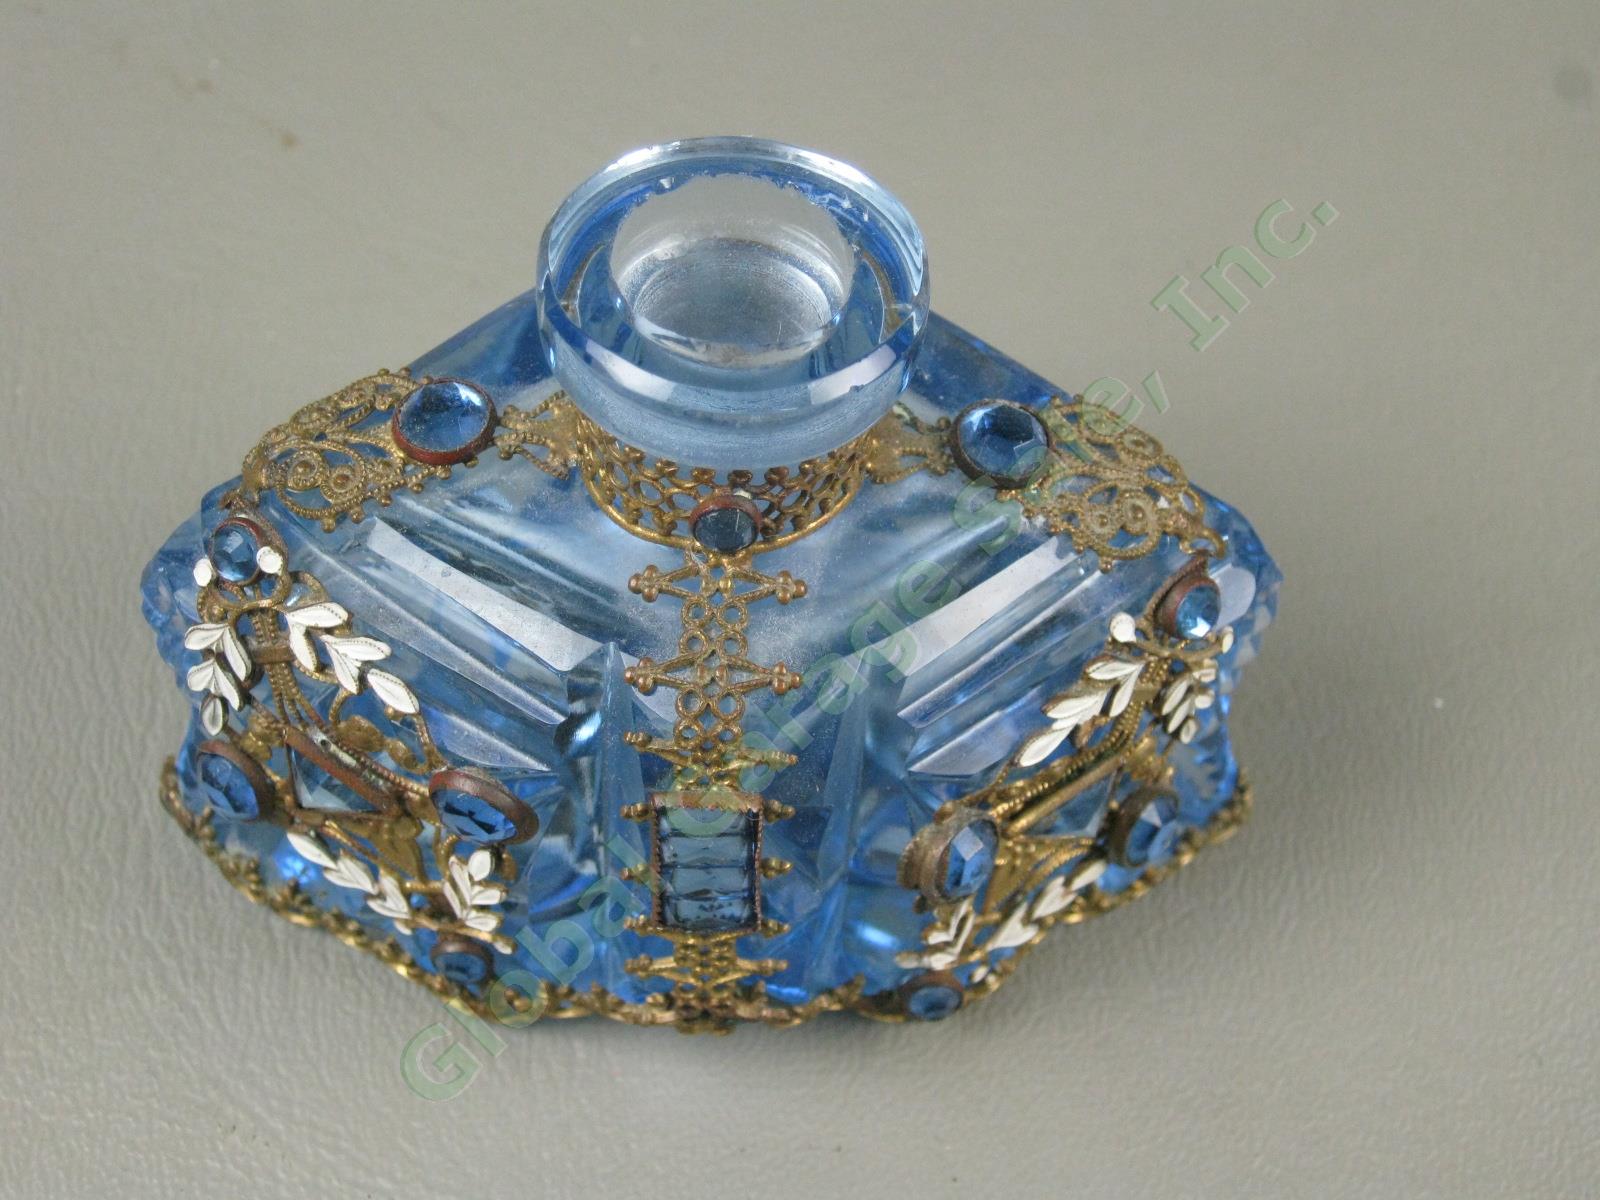 Vintage Antique Czech Blue Glass Jeweled Filigree Perfume Bottle With Stopper NR 7